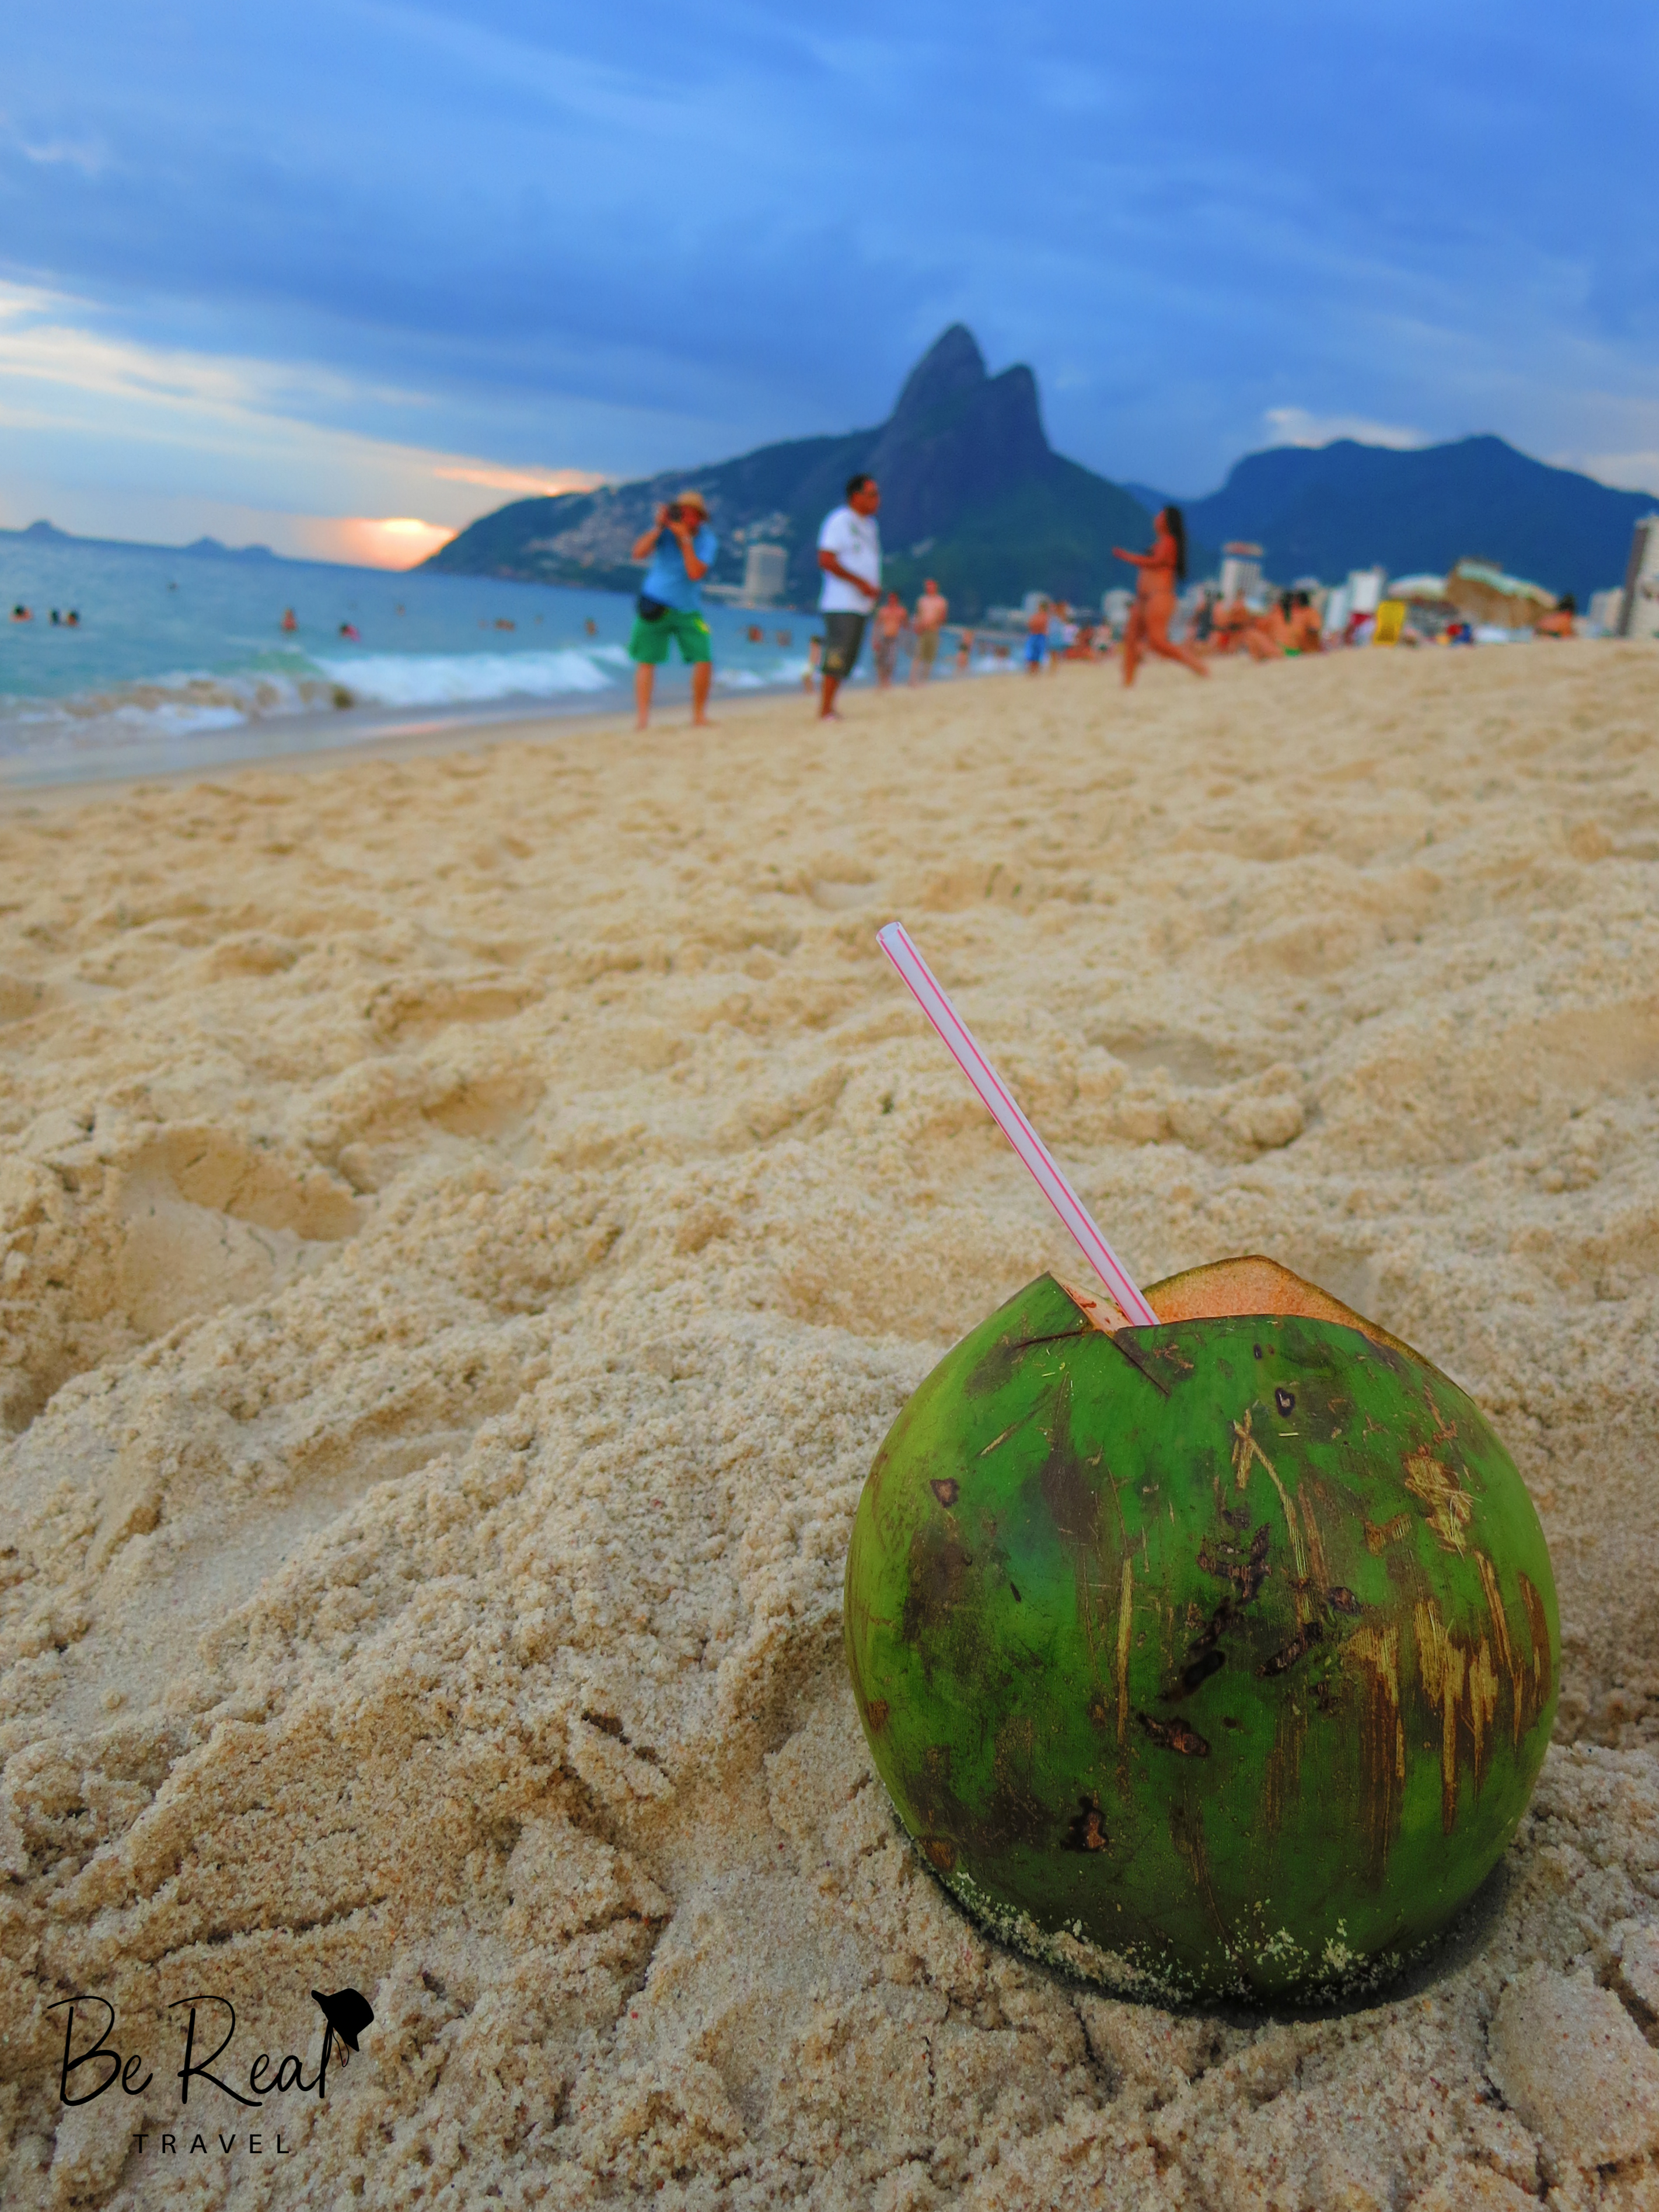 Fresh coconut juice is one of the many reasons that Rio de Janeiro is not overrated